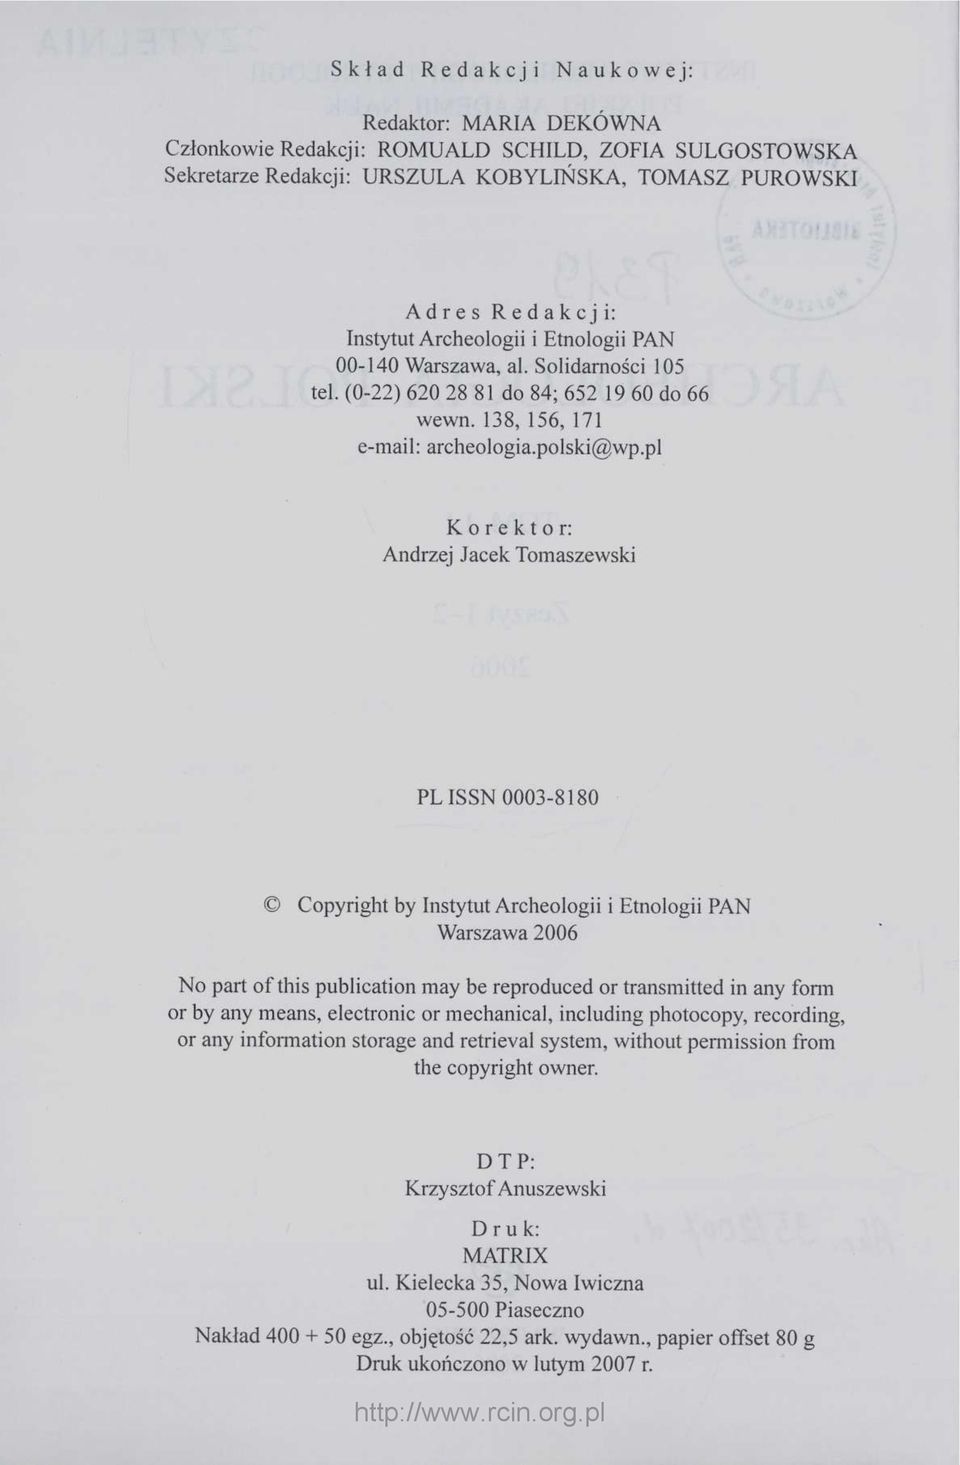 pl Korektor: Andrzej Jacek Tomaszewski PL ISSN 0003-8180 Copyright by Instytut Archeologii i Etnologii PAN Warszawa 2006 No part of this publication may be reproduced or transmitted in any form or by